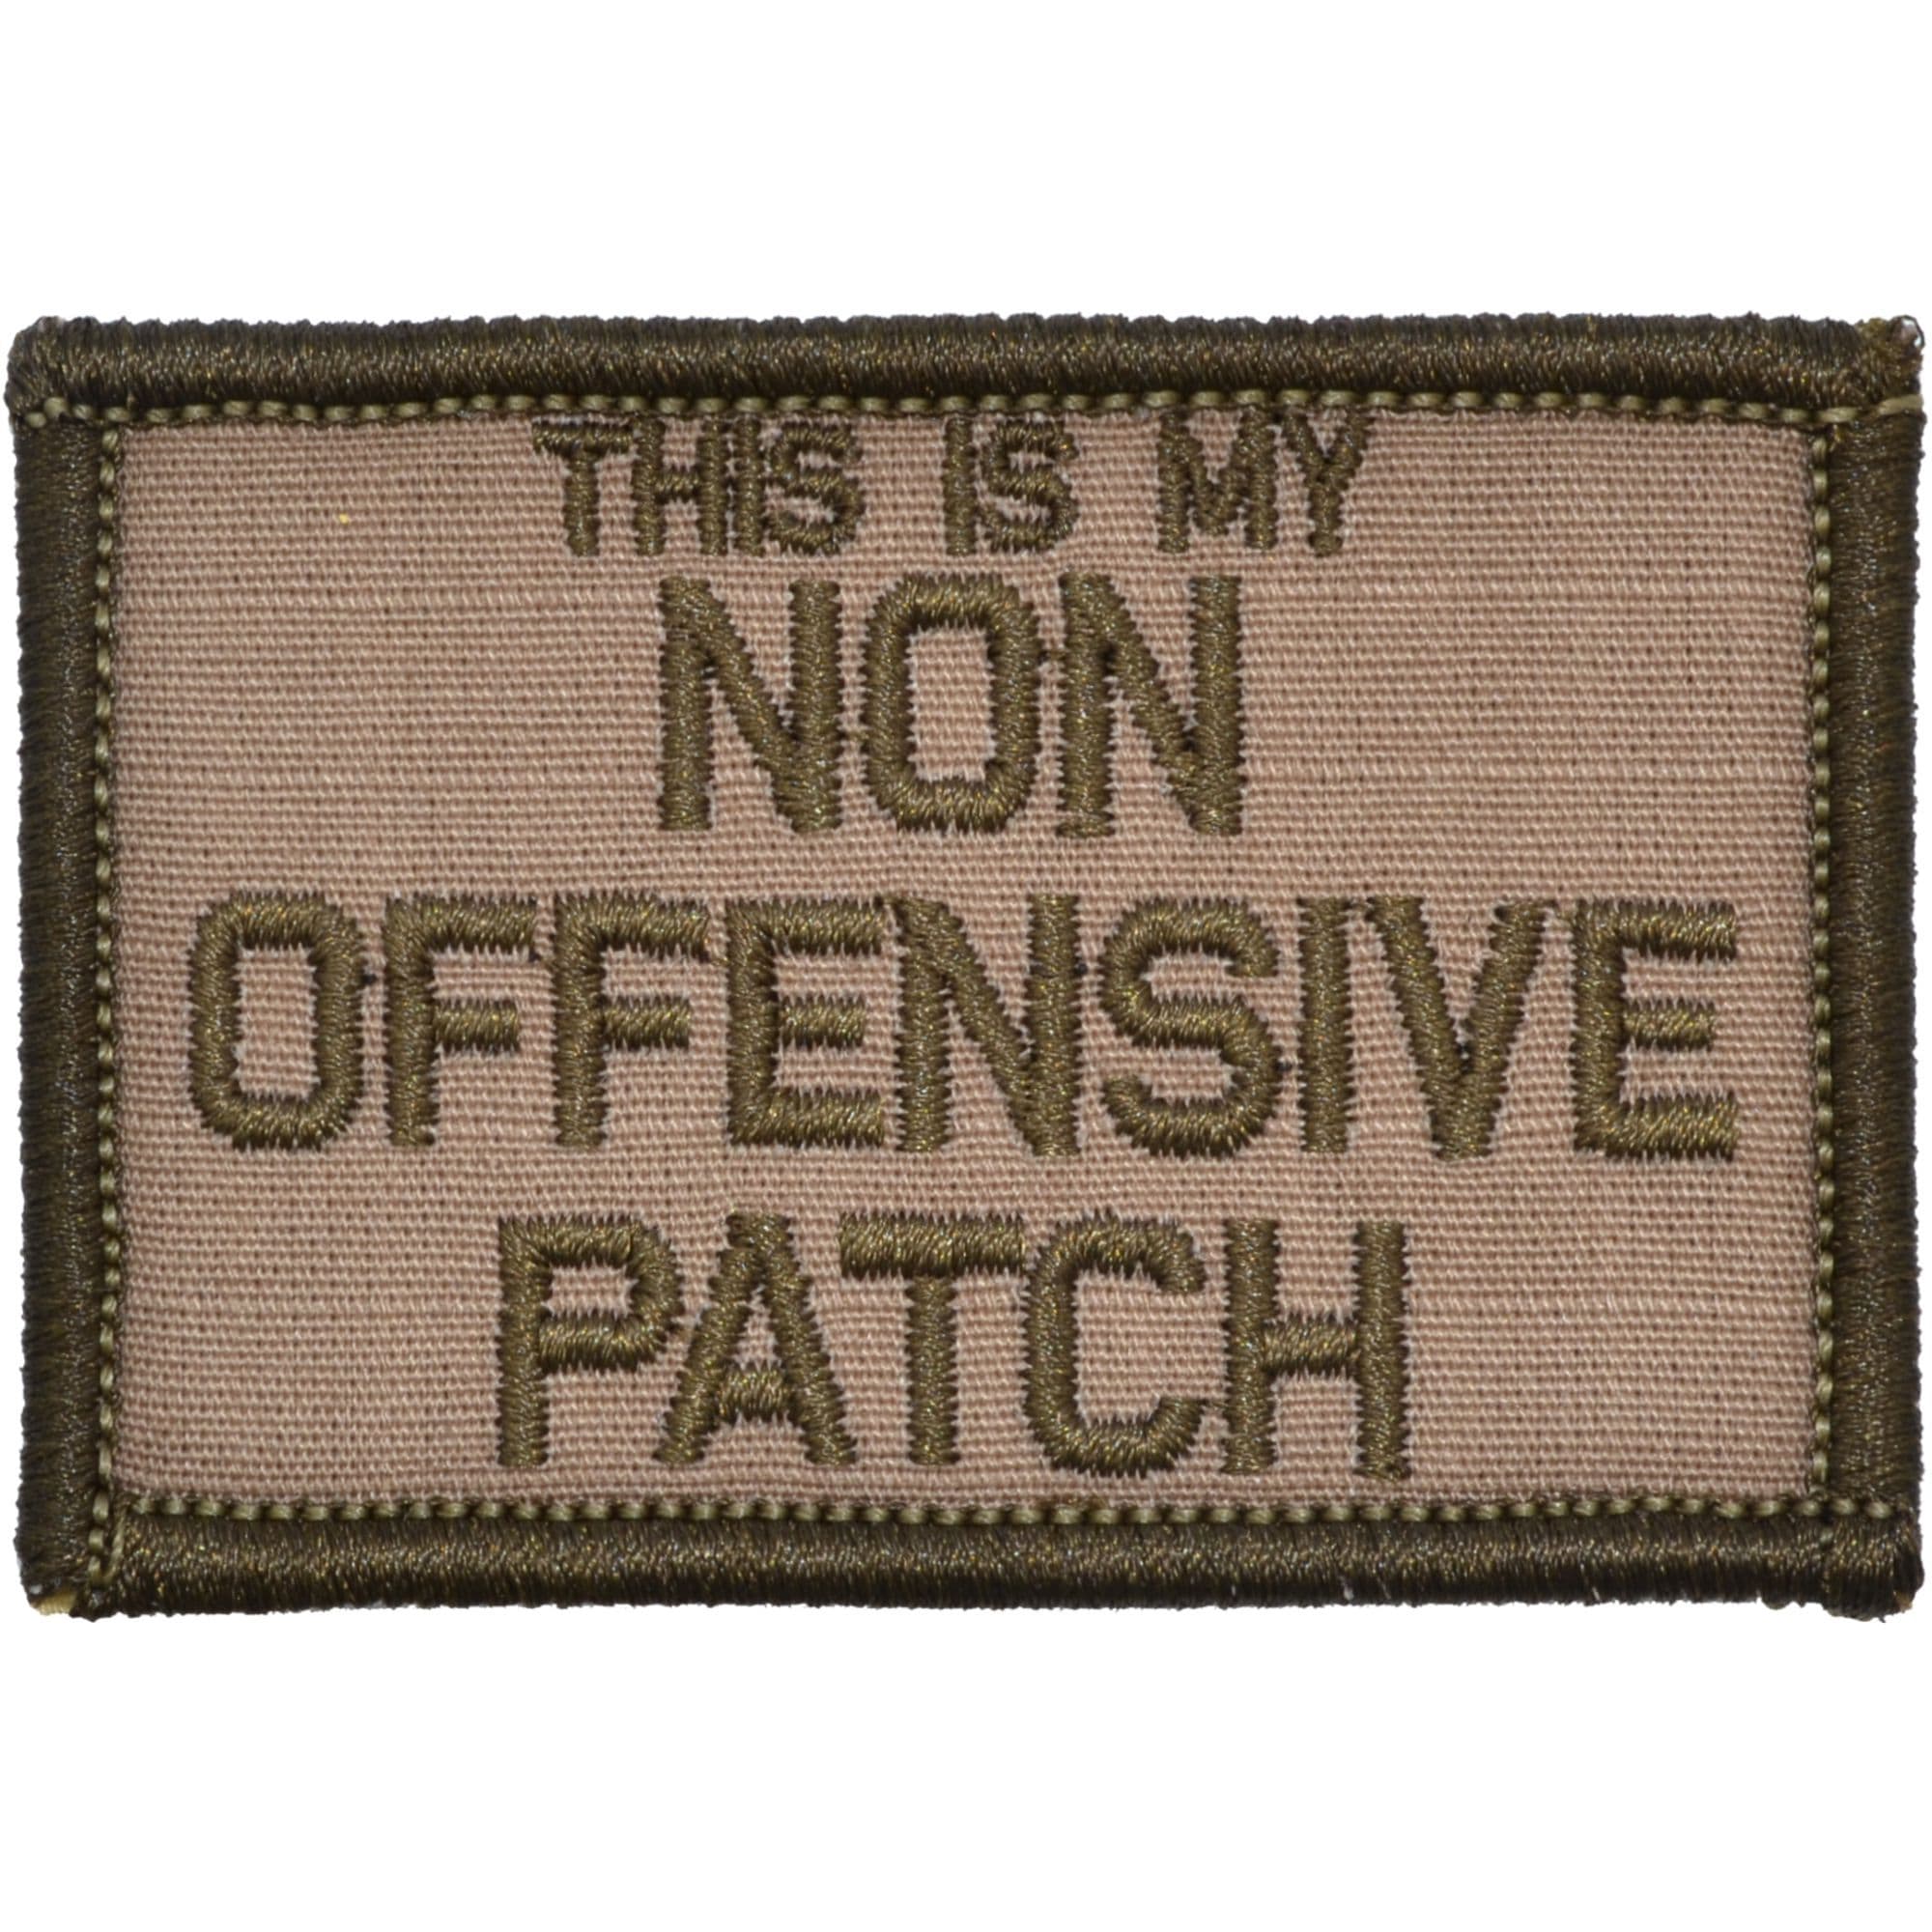 Tactical Gear Junkie Patches Coyote Brown This Is My Non Offensive Patch - 2x3 Patch